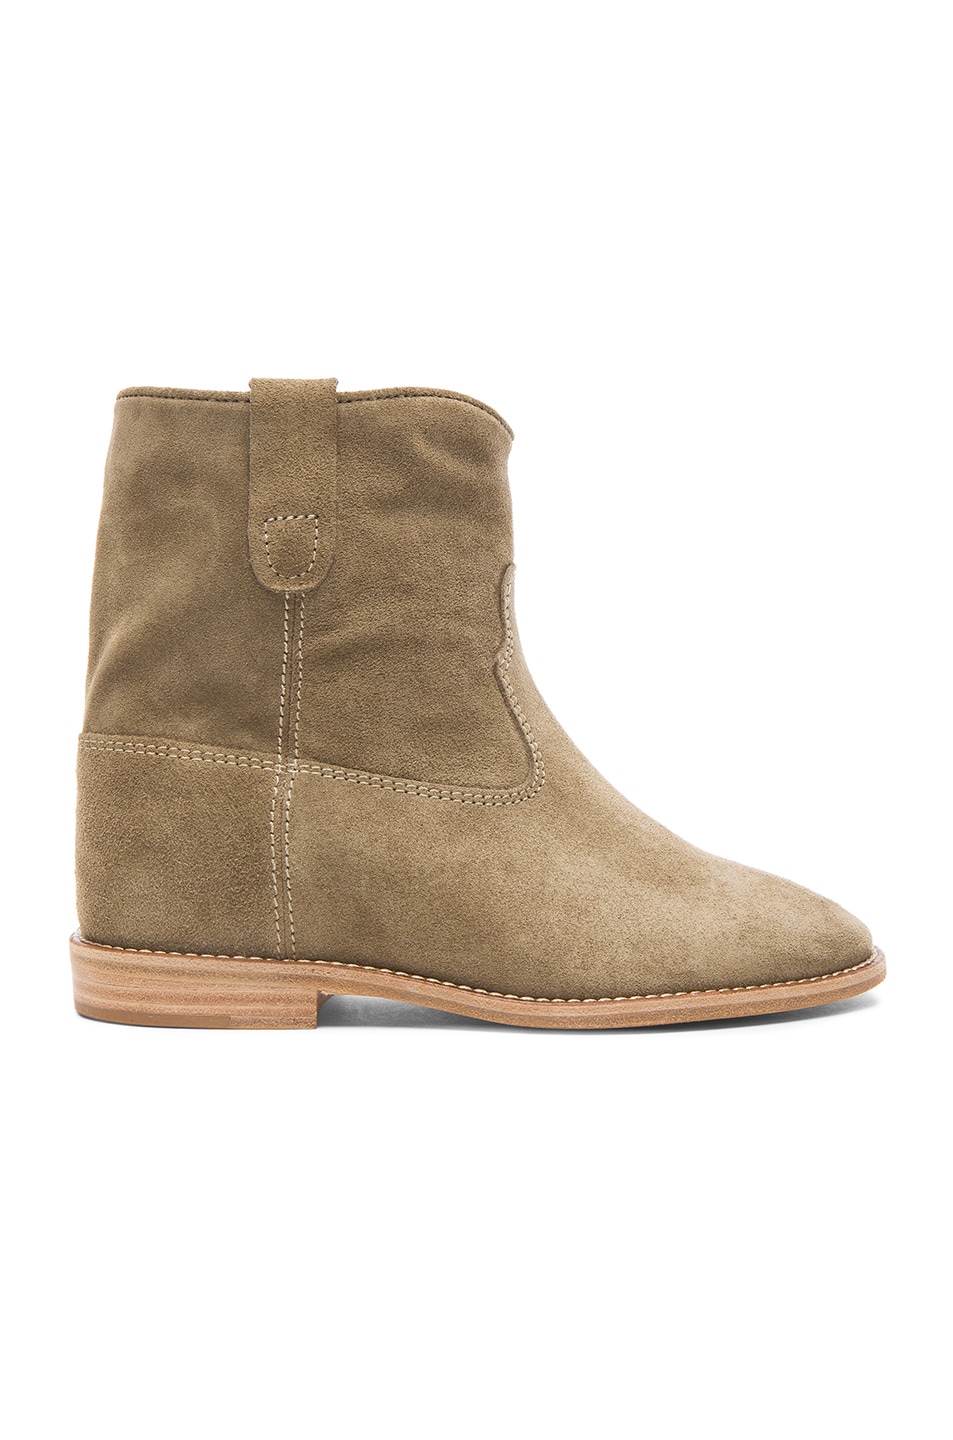 Image 1 of Isabel Marant Etoile Crisi Calfskin Velvet Leather Boots in Taupe